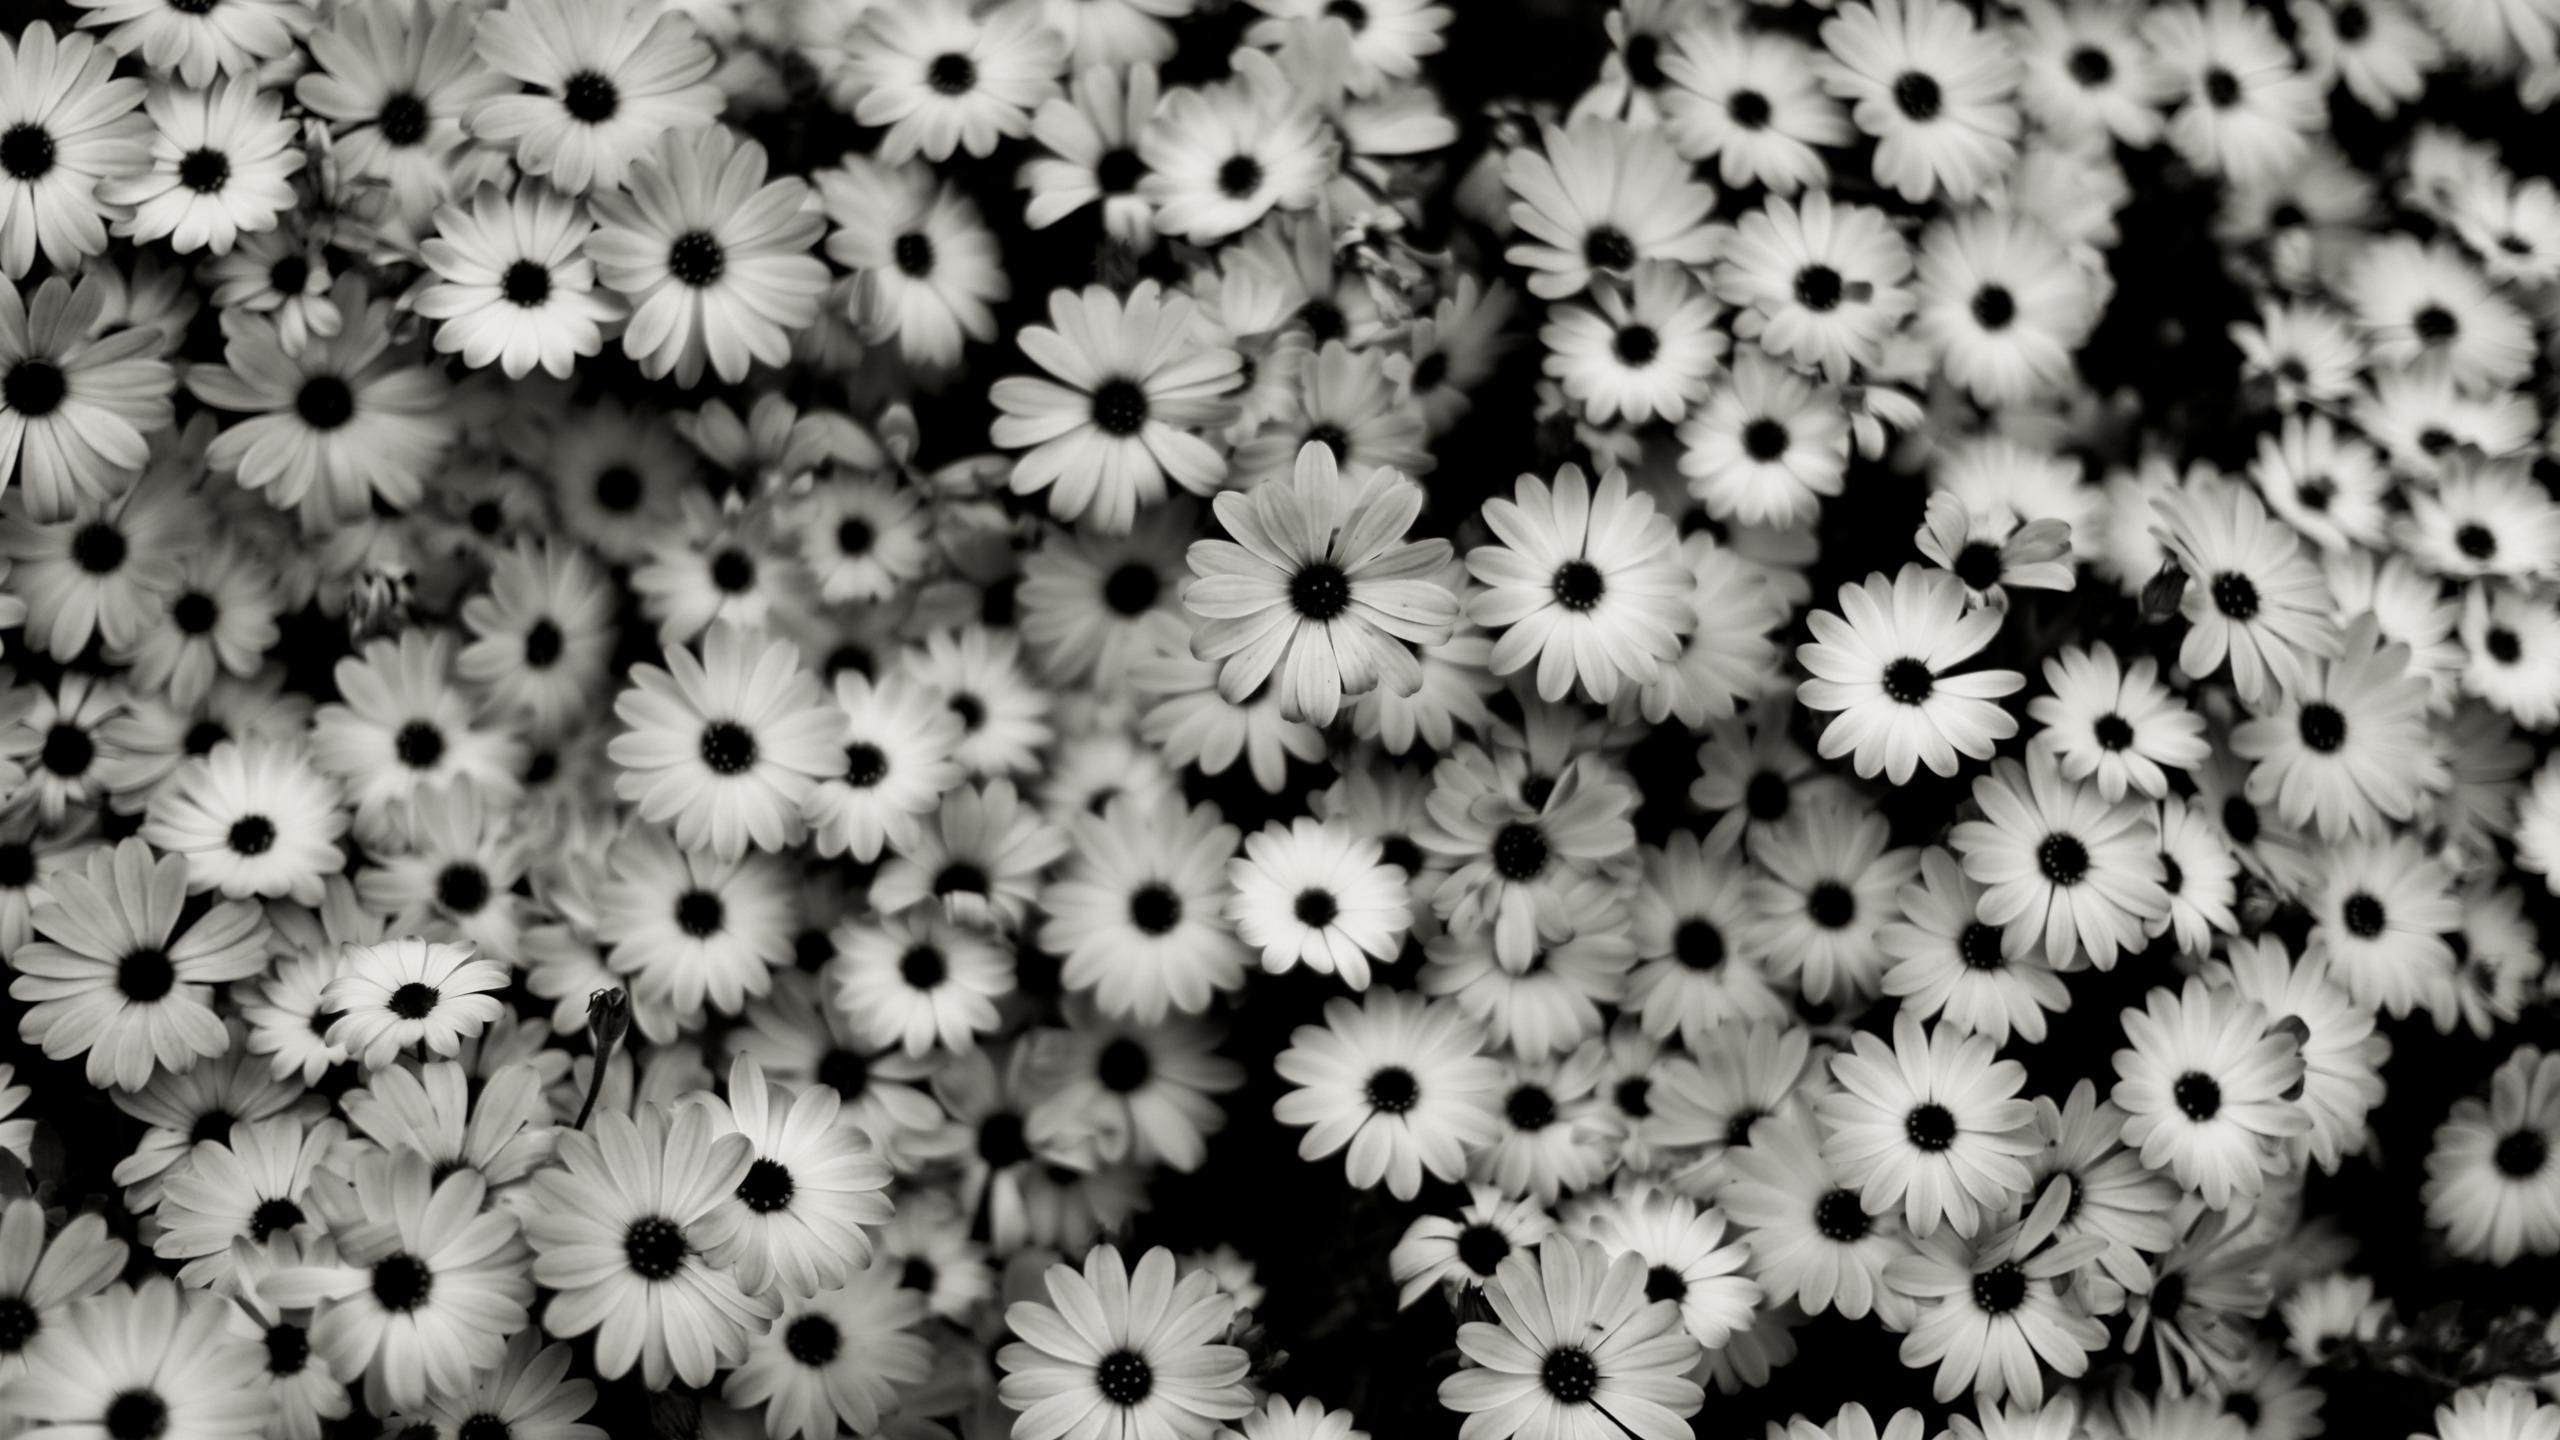 A black and white photo of many flowers - Black and white